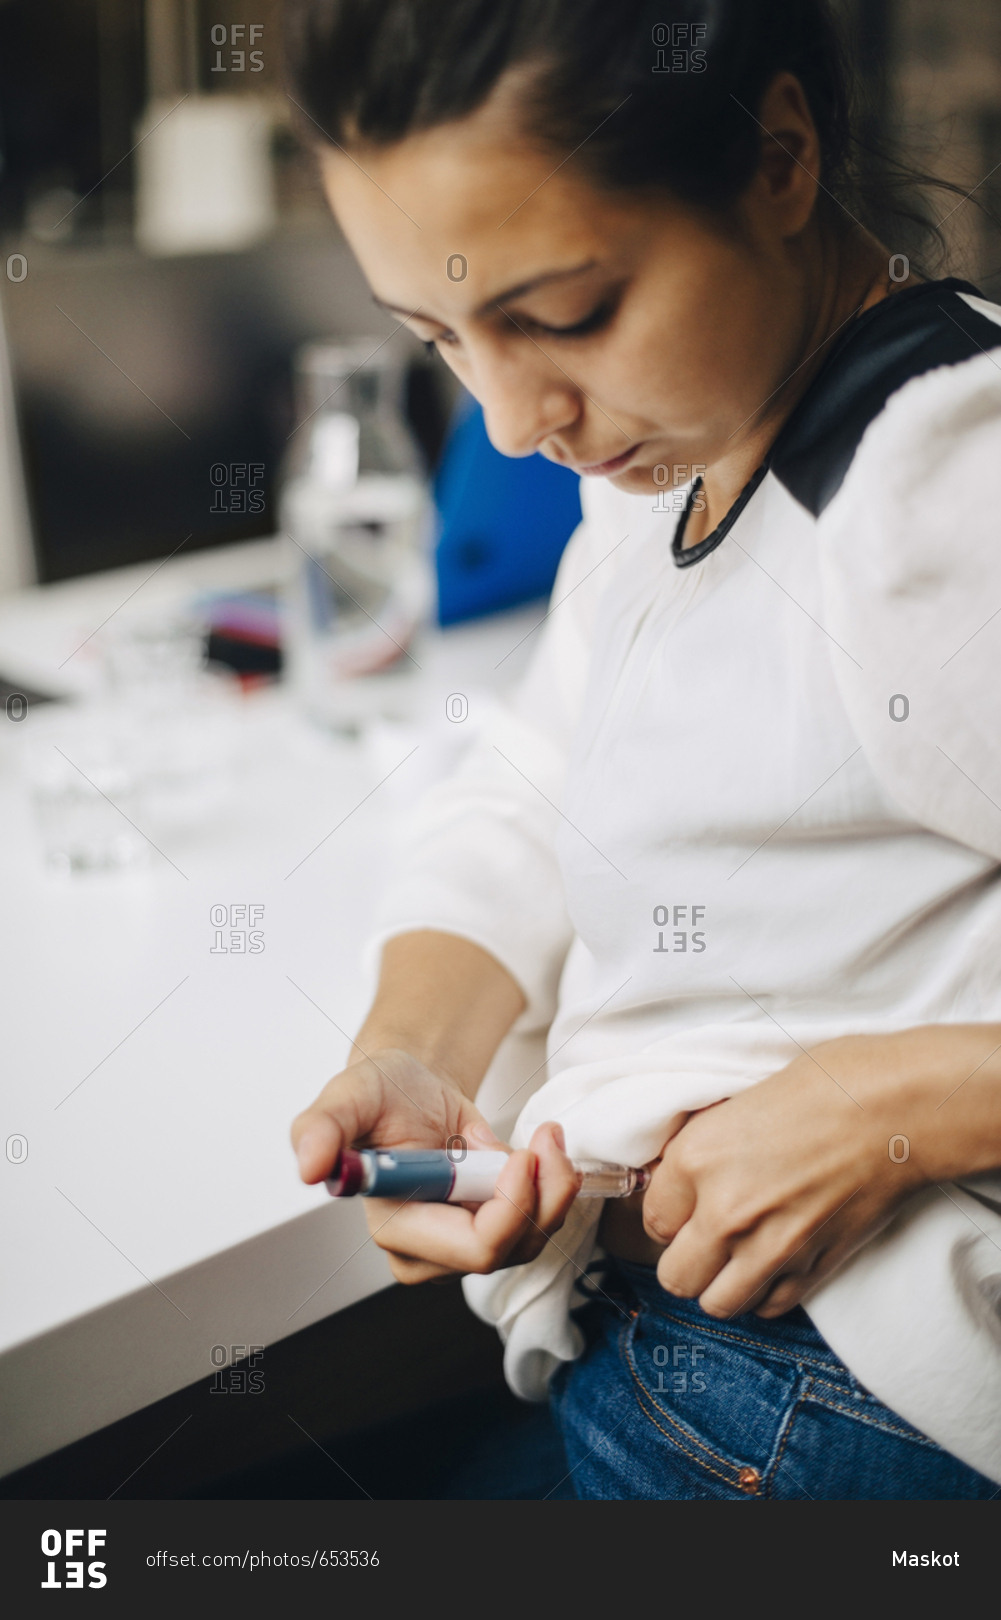 Businesswoman injecting insulin while sitting at table